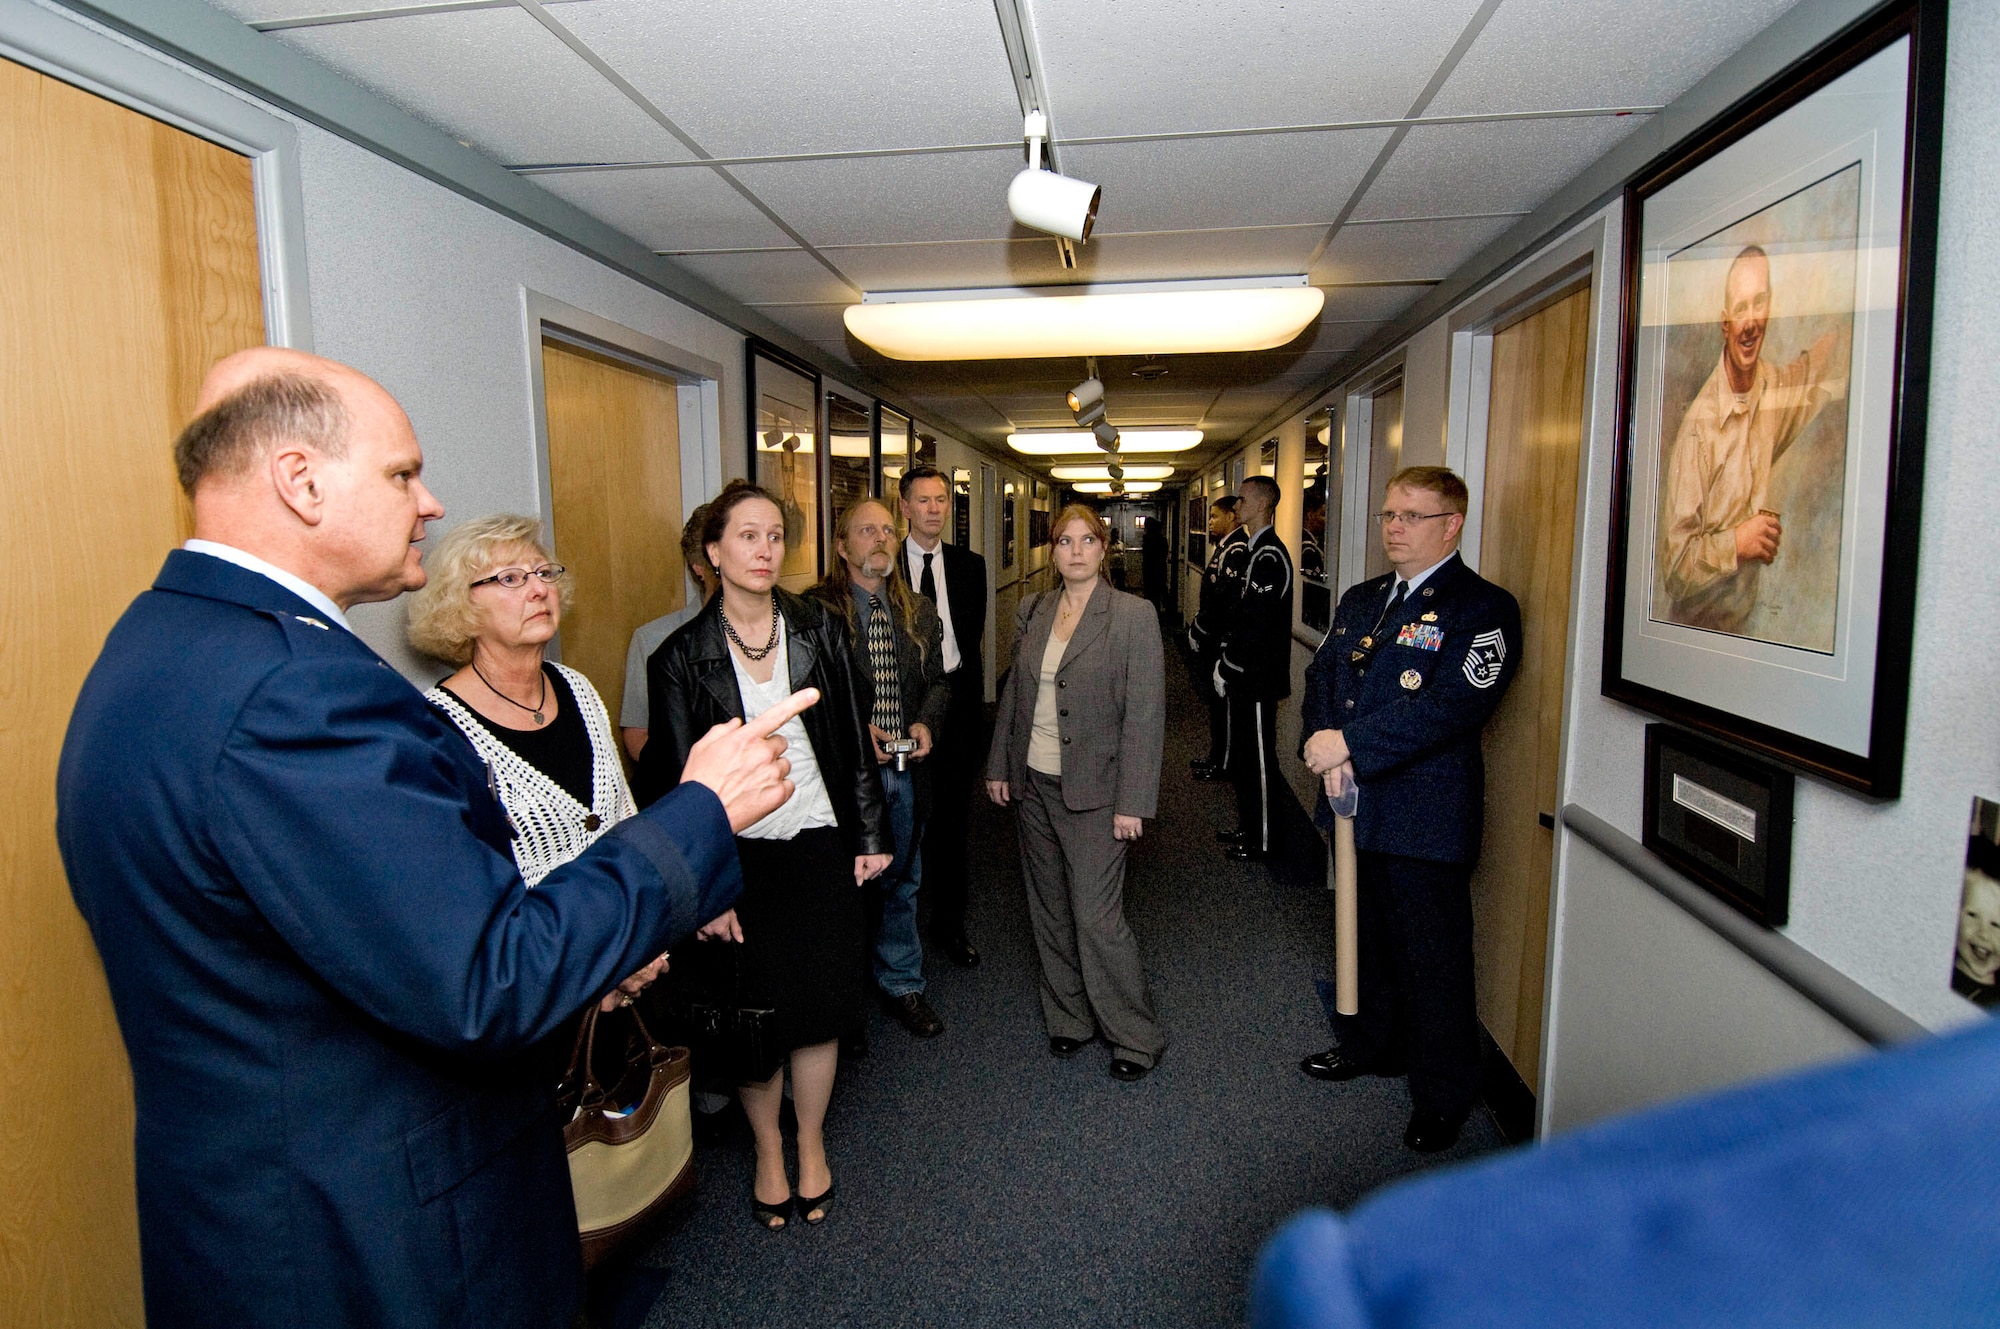 Brigadier General Dana Simmons, commander, Air Force Office of Special Investigations, tours the AFOSI Hall of Heroes with family members of Special Agent Thomas Crowell. (U.S. Air Force photo/Mike Hastings)